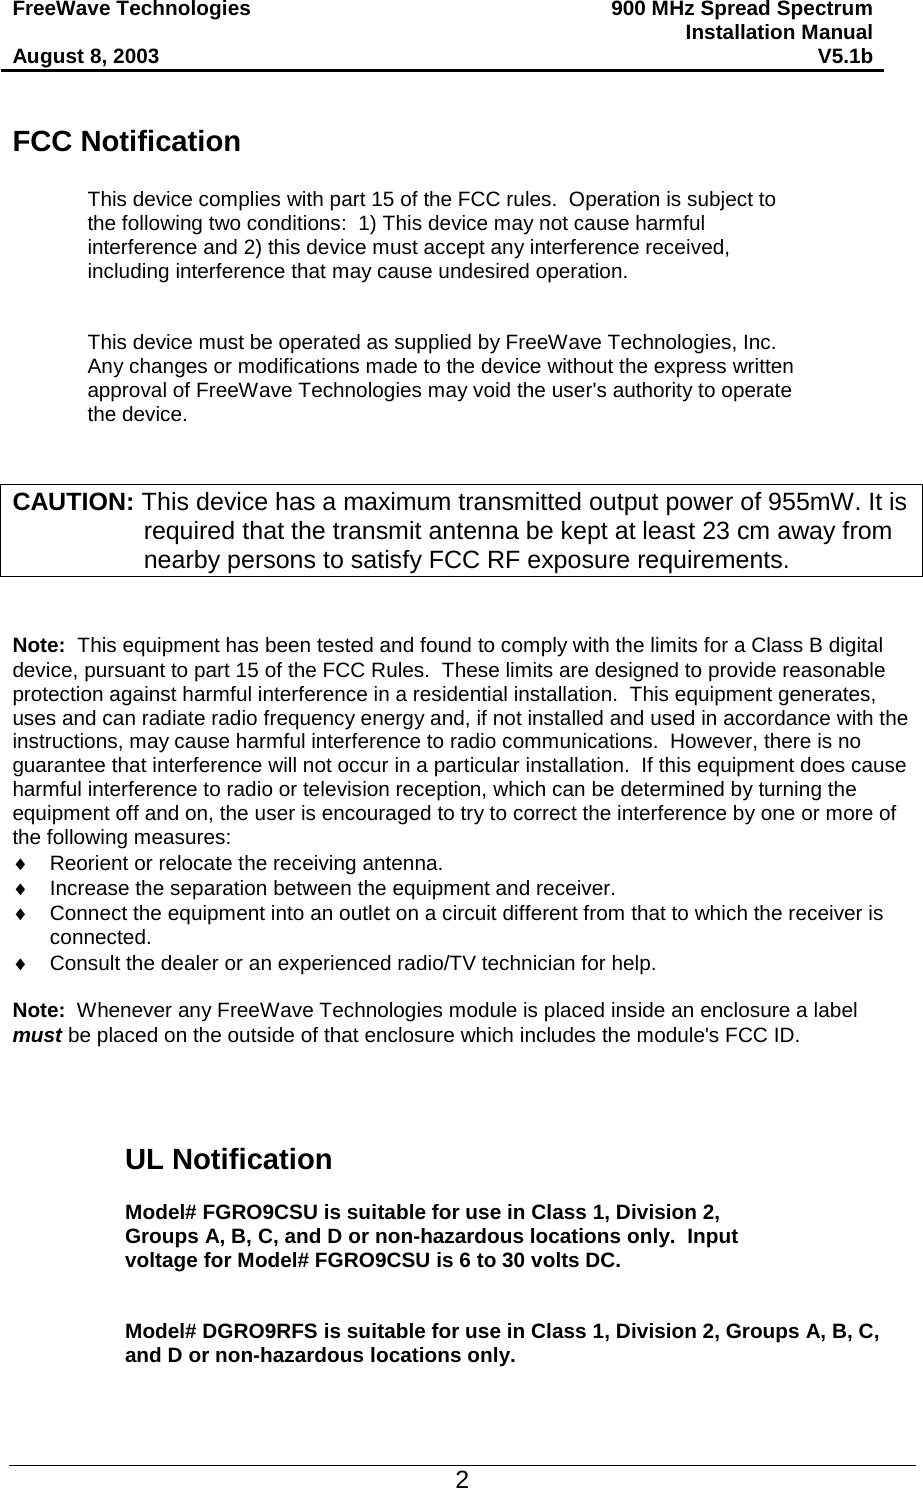 FreeWave Technologies  August 8, 2003 900 MHz Spread Spectrum Installation Manual V5.1b   FCC Notification  This device complies with part 15 of the FCC rules.  Operation is subject to the following two conditions:  1) This device may not cause harmful interference and 2) this device must accept any interference received, including interference that may cause undesired operation.   This device must be operated as supplied by FreeWave Technologies, Inc.  Any changes or modifications made to the device without the express written approval of FreeWave Technologies may void the user&apos;s authority to operate the device.    CAUTION: This device has a maximum transmitted output power of 955mW. It is required that the transmit antenna be kept at least 23 cm away from nearby persons to satisfy FCC RF exposure requirements.   Note:  This equipment has been tested and found to comply with the limits for a Class B digital device, pursuant to part 15 of the FCC Rules.  These limits are designed to provide reasonable protection against harmful interference in a residential installation.  This equipment generates, uses and can radiate radio frequency energy and, if not installed and used in accordance with the instructions, may cause harmful interference to radio communications.  However, there is no guarantee that interference will not occur in a particular installation.  If this equipment does cause harmful interference to radio or television reception, which can be determined by turning the equipment off and on, the user is encouraged to try to correct the interference by one or more of the following measures: ♦  Reorient or relocate the receiving antenna. ♦  Increase the separation between the equipment and receiver. ♦  Connect the equipment into an outlet on a circuit different from that to which the receiver is connected. ♦  Consult the dealer or an experienced radio/TV technician for help.  Note:  Whenever any FreeWave Technologies module is placed inside an enclosure a label must be placed on the outside of that enclosure which includes the module&apos;s FCC ID.     UL Notification  Model# FGRO9CSU is suitable for use in Class 1, Division 2, Groups A, B, C, and D or non-hazardous locations only.  Input voltage for Model# FGRO9CSU is 6 to 30 volts DC.   Model# DGRO9RFS is suitable for use in Class 1, Division 2, Groups A, B, C, and D or non-hazardous locations only.    2 